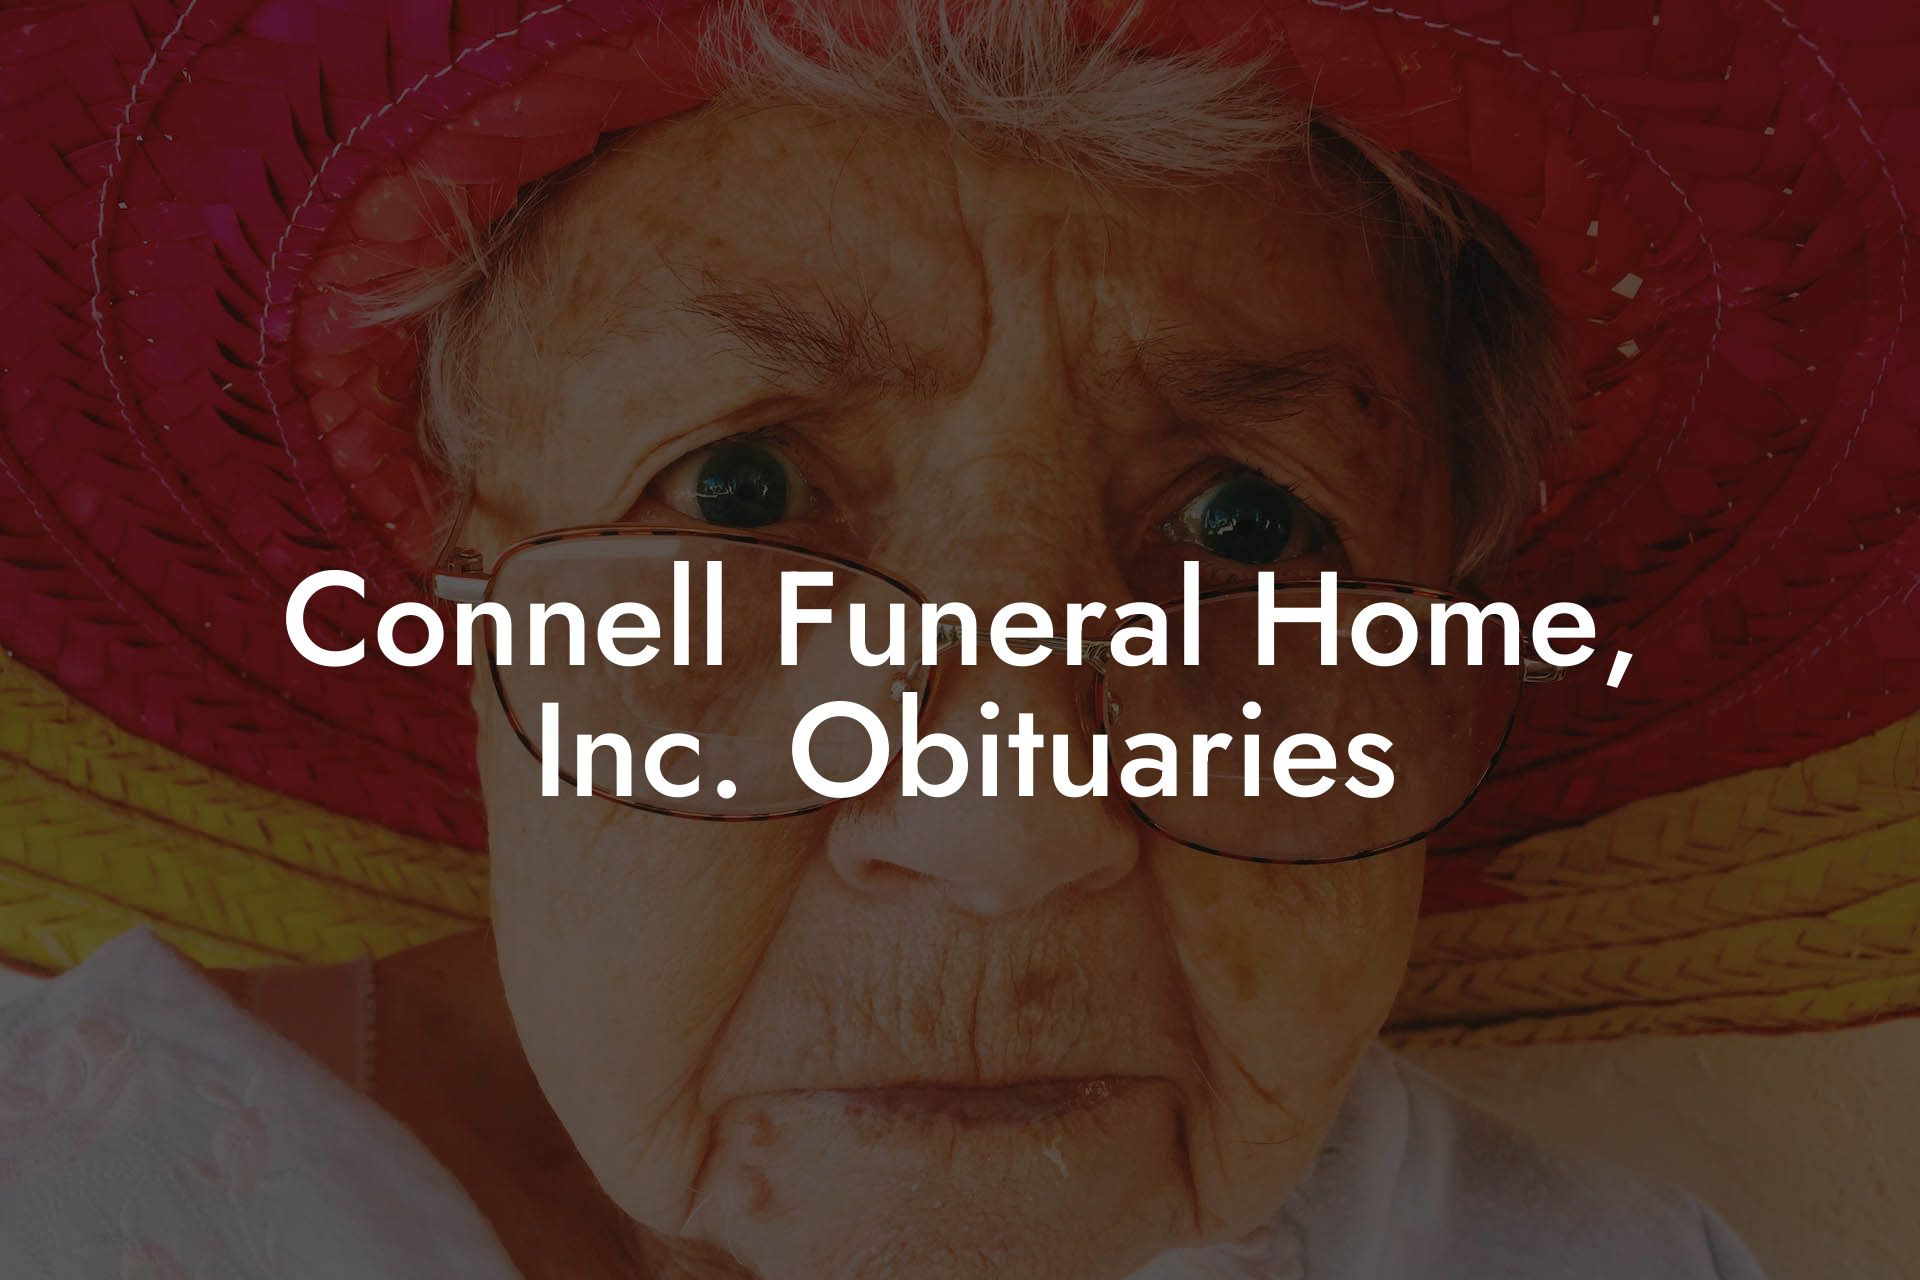 Connell Funeral Home, Inc. Obituaries